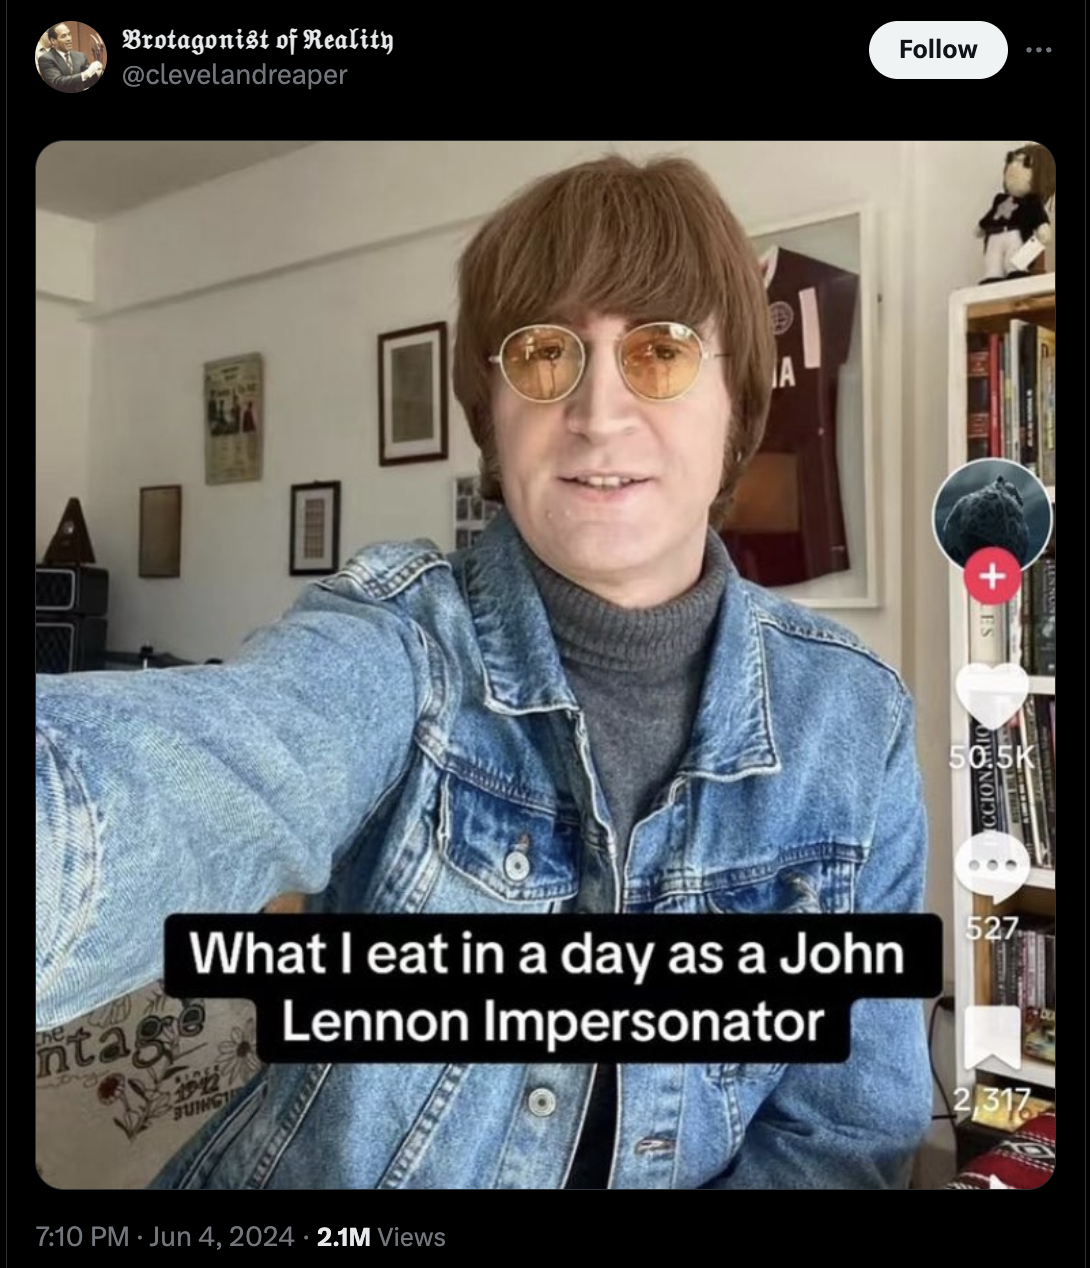 photo caption - nta Brotagonist of Reality What I eat in a day as a John Lennon Impersonator 2.1M Views 527